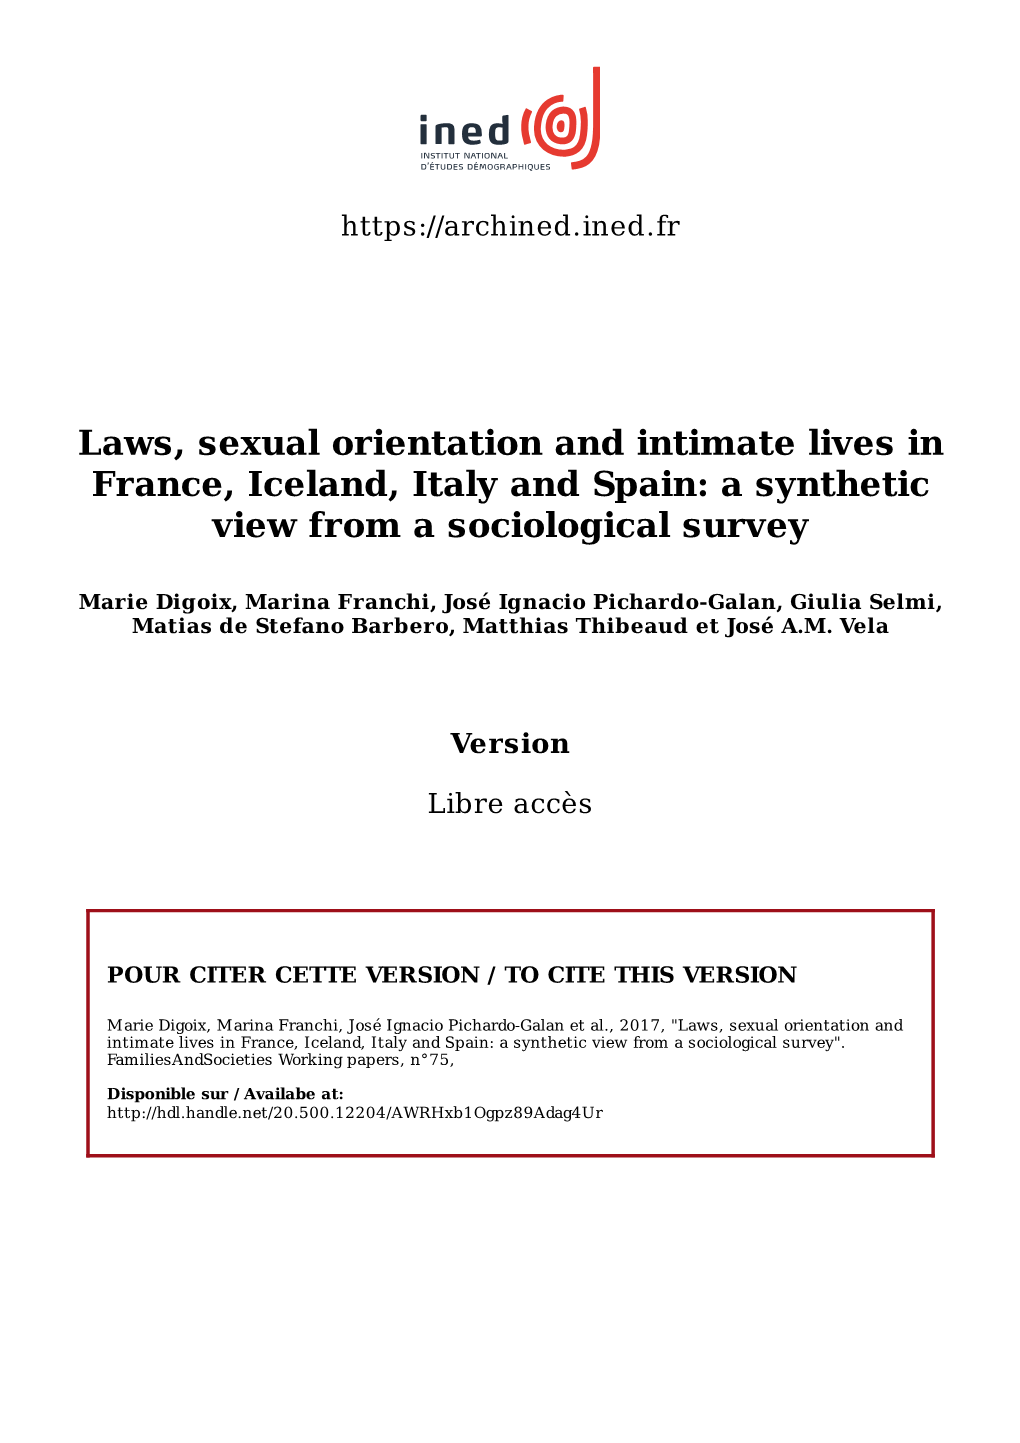 Laws, Sexual Orientation and Intimate Lives in France, Iceland, Italy and Spain: a Synthetic View from a Sociological Survey